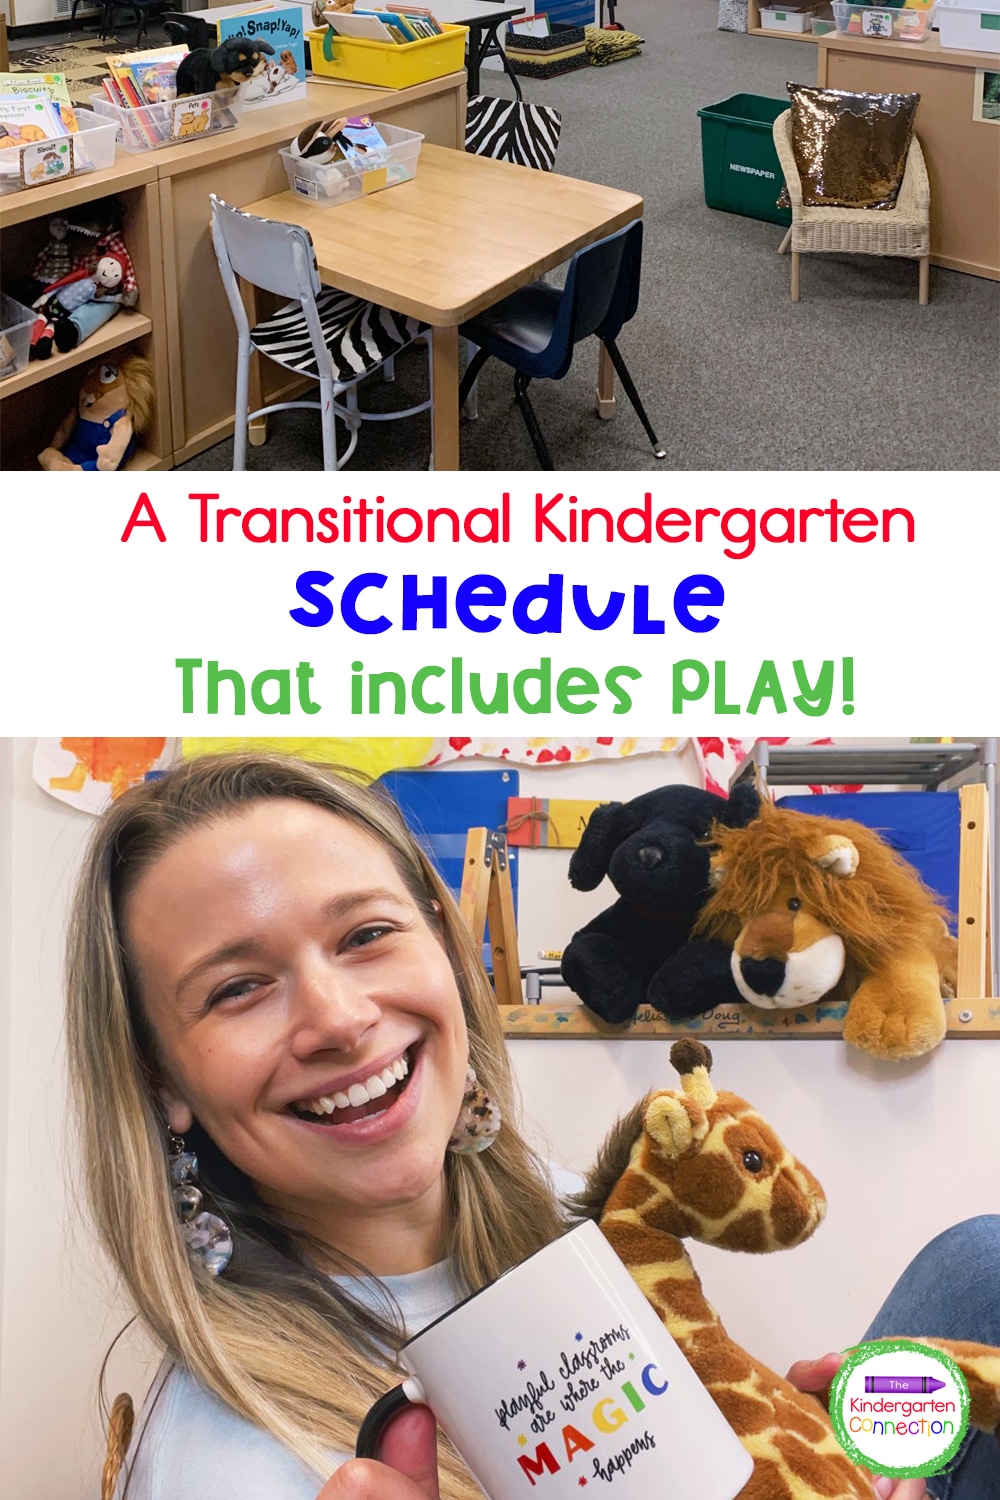 Check out my daily Transitional Kindergarten schedule to take a peek at a "normal" day in a TK classroom that includes PLAY!